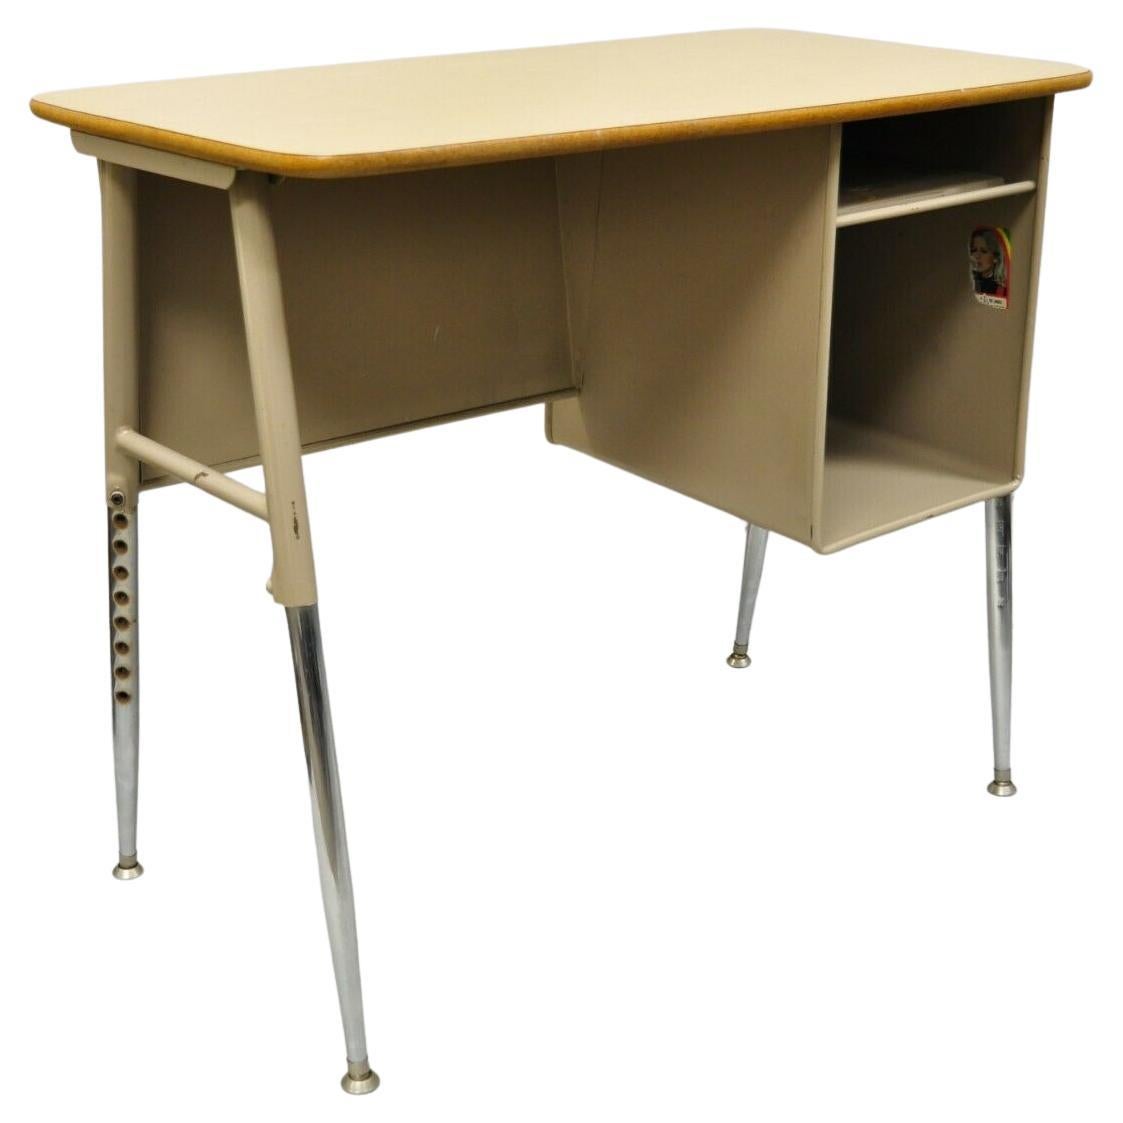 Vintage Adjustable Height Metal School Writing Desk With Laminate Top For Sale